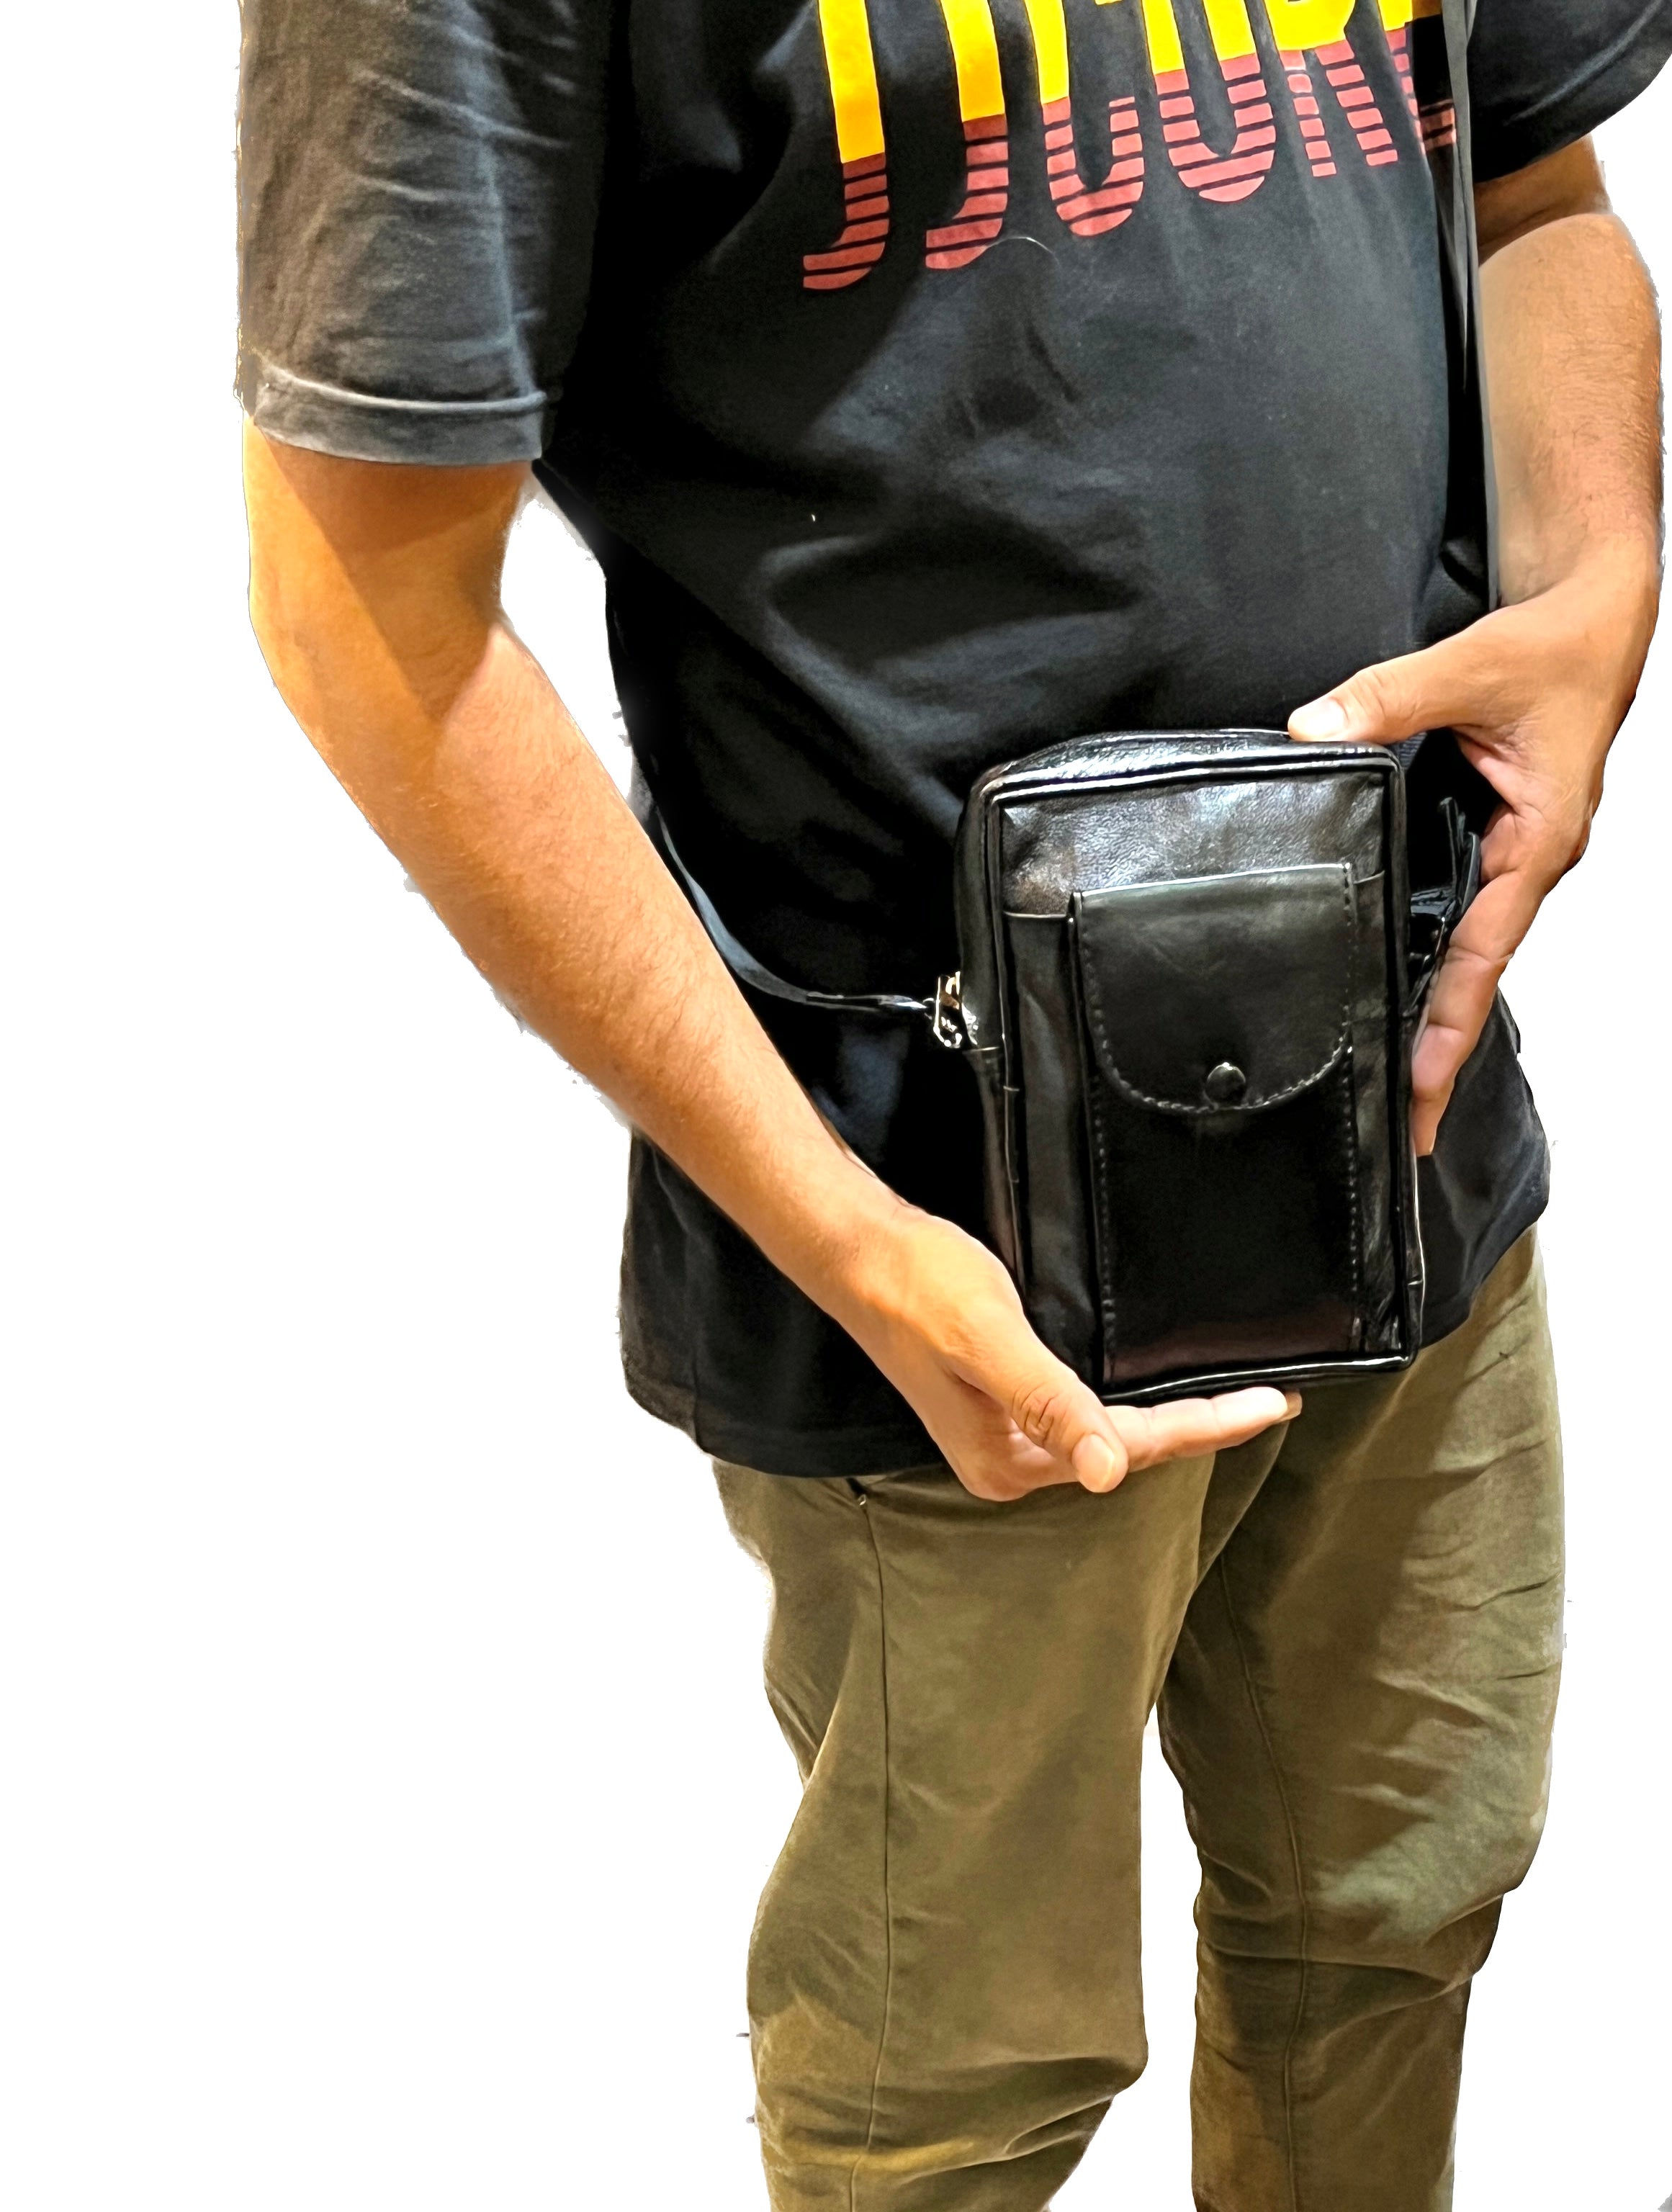 15 Functional and Cool Messenger Bags for Men